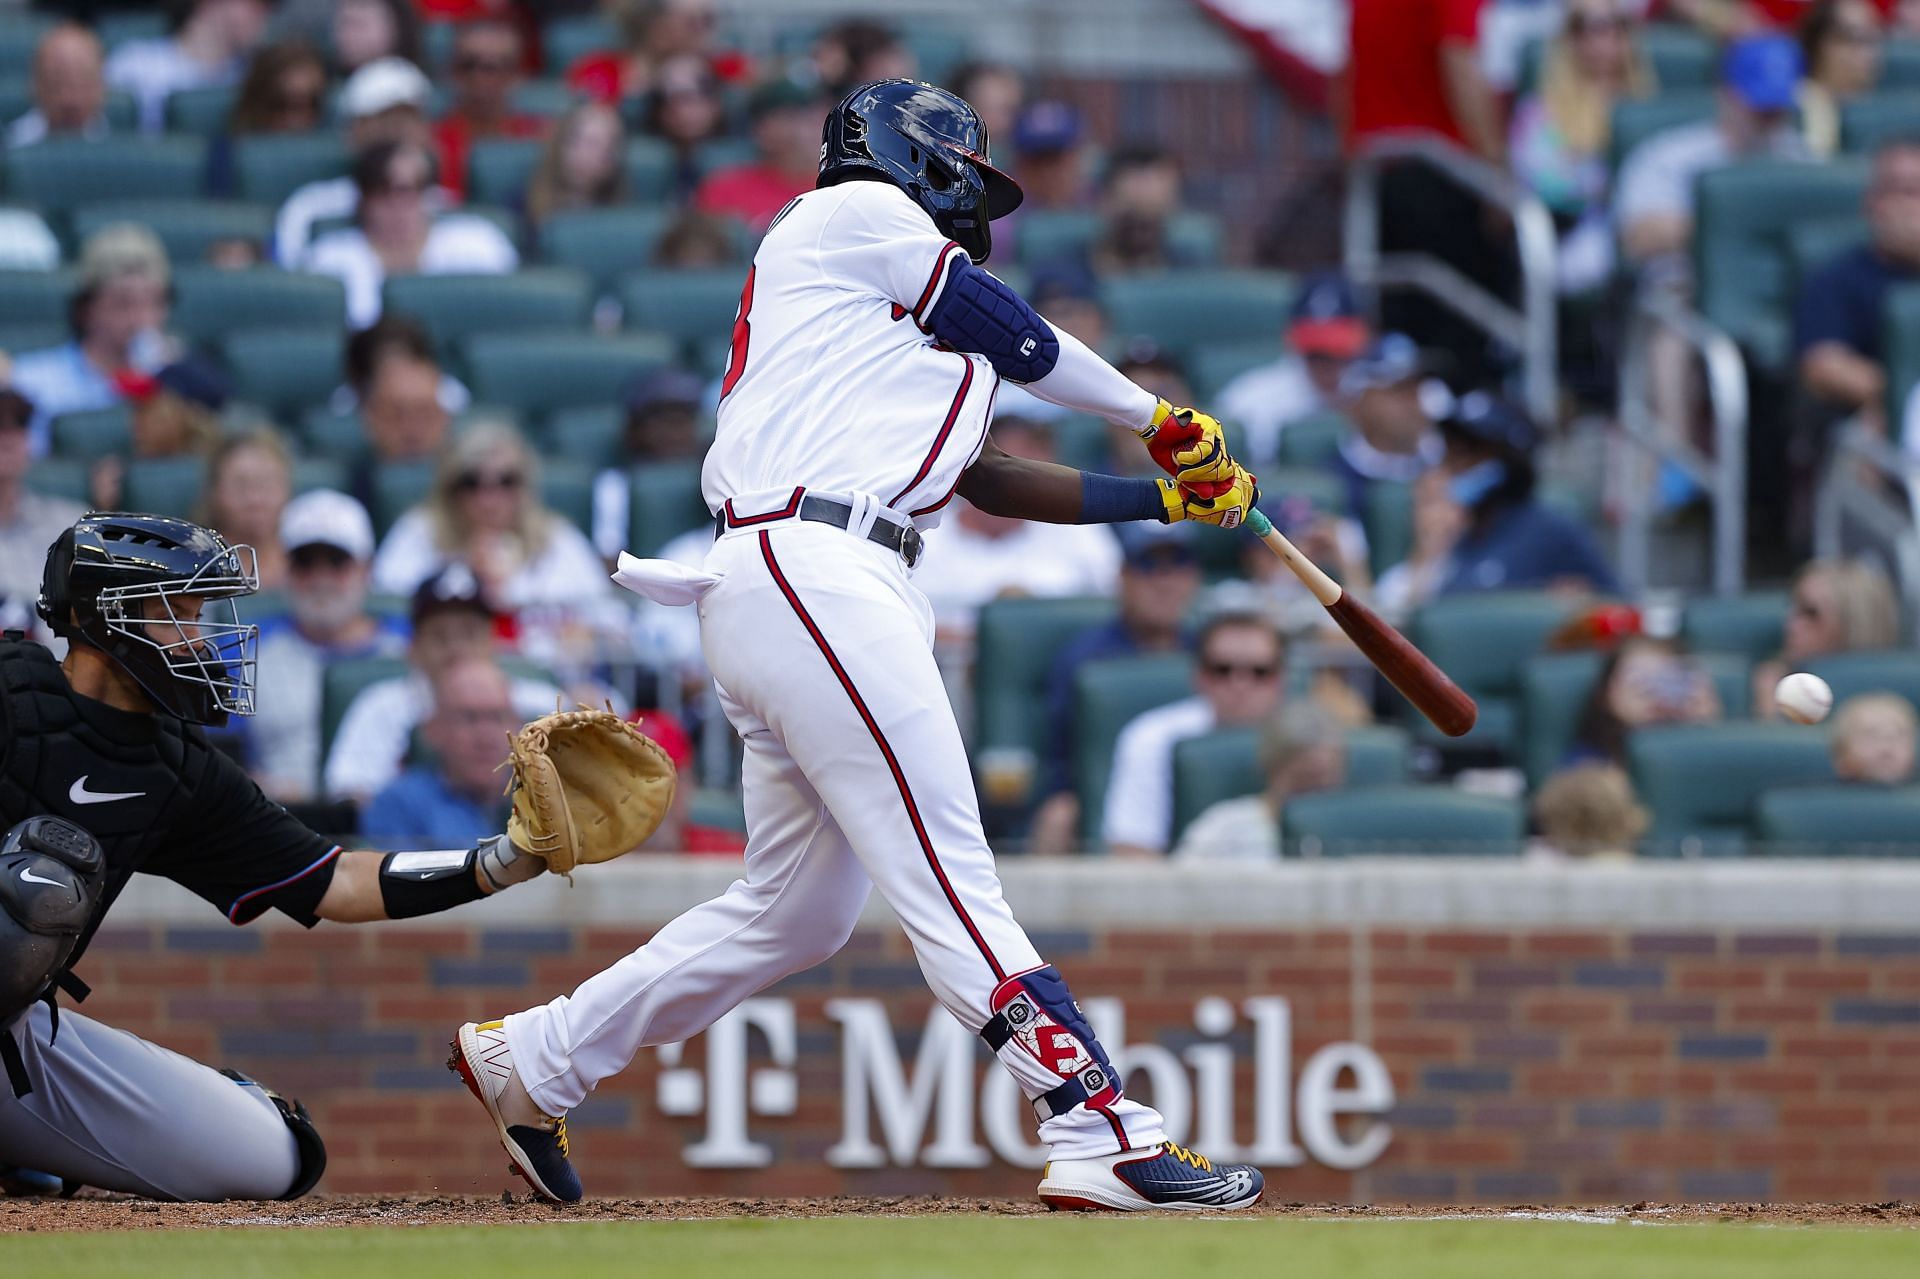 Braves call up top prospect Michael Harris for his MLB debut